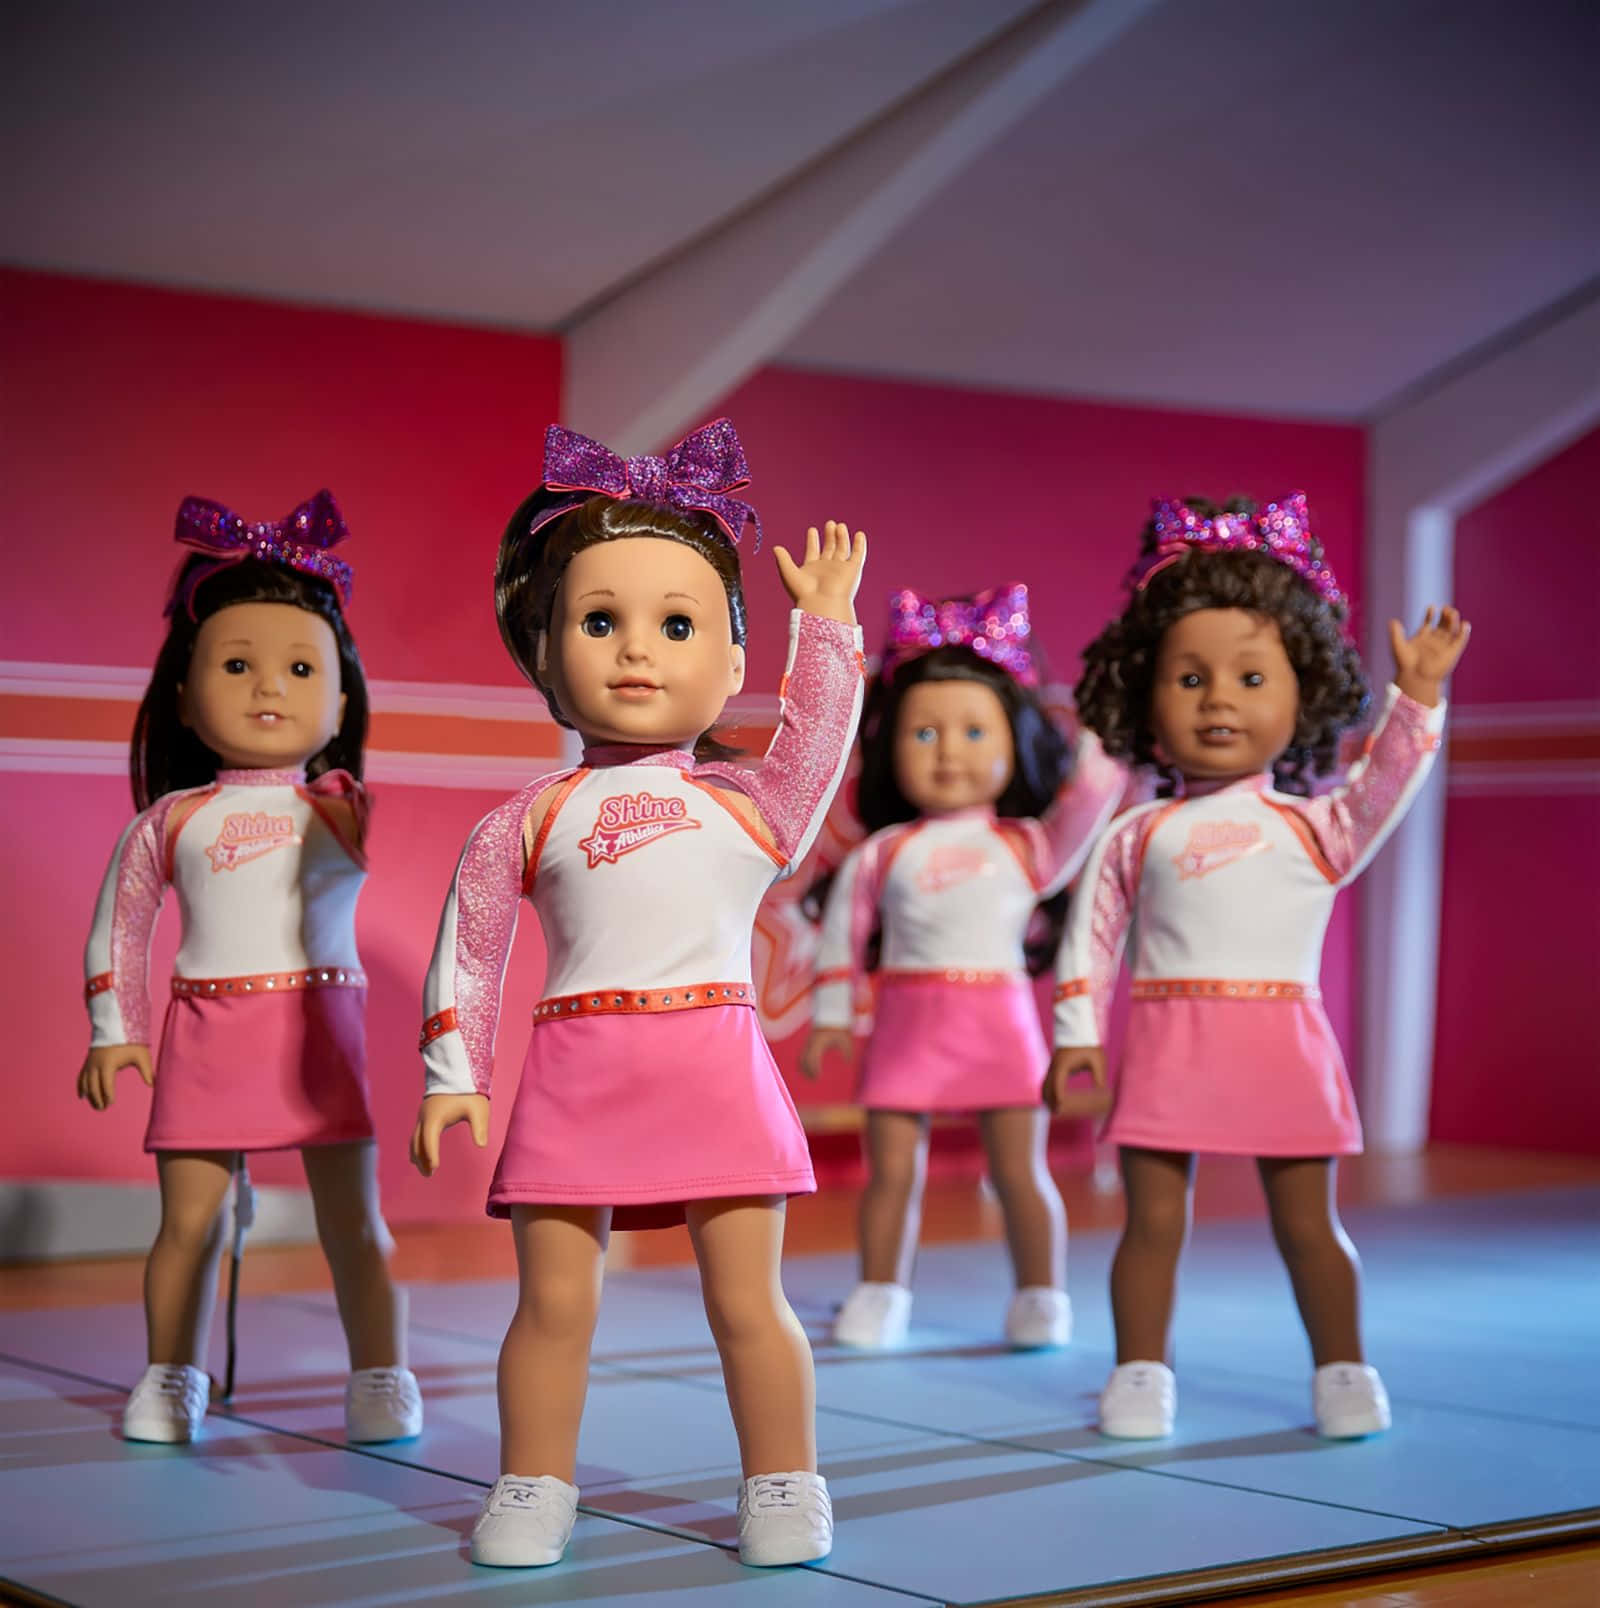 Create new stories for an iconic American girl